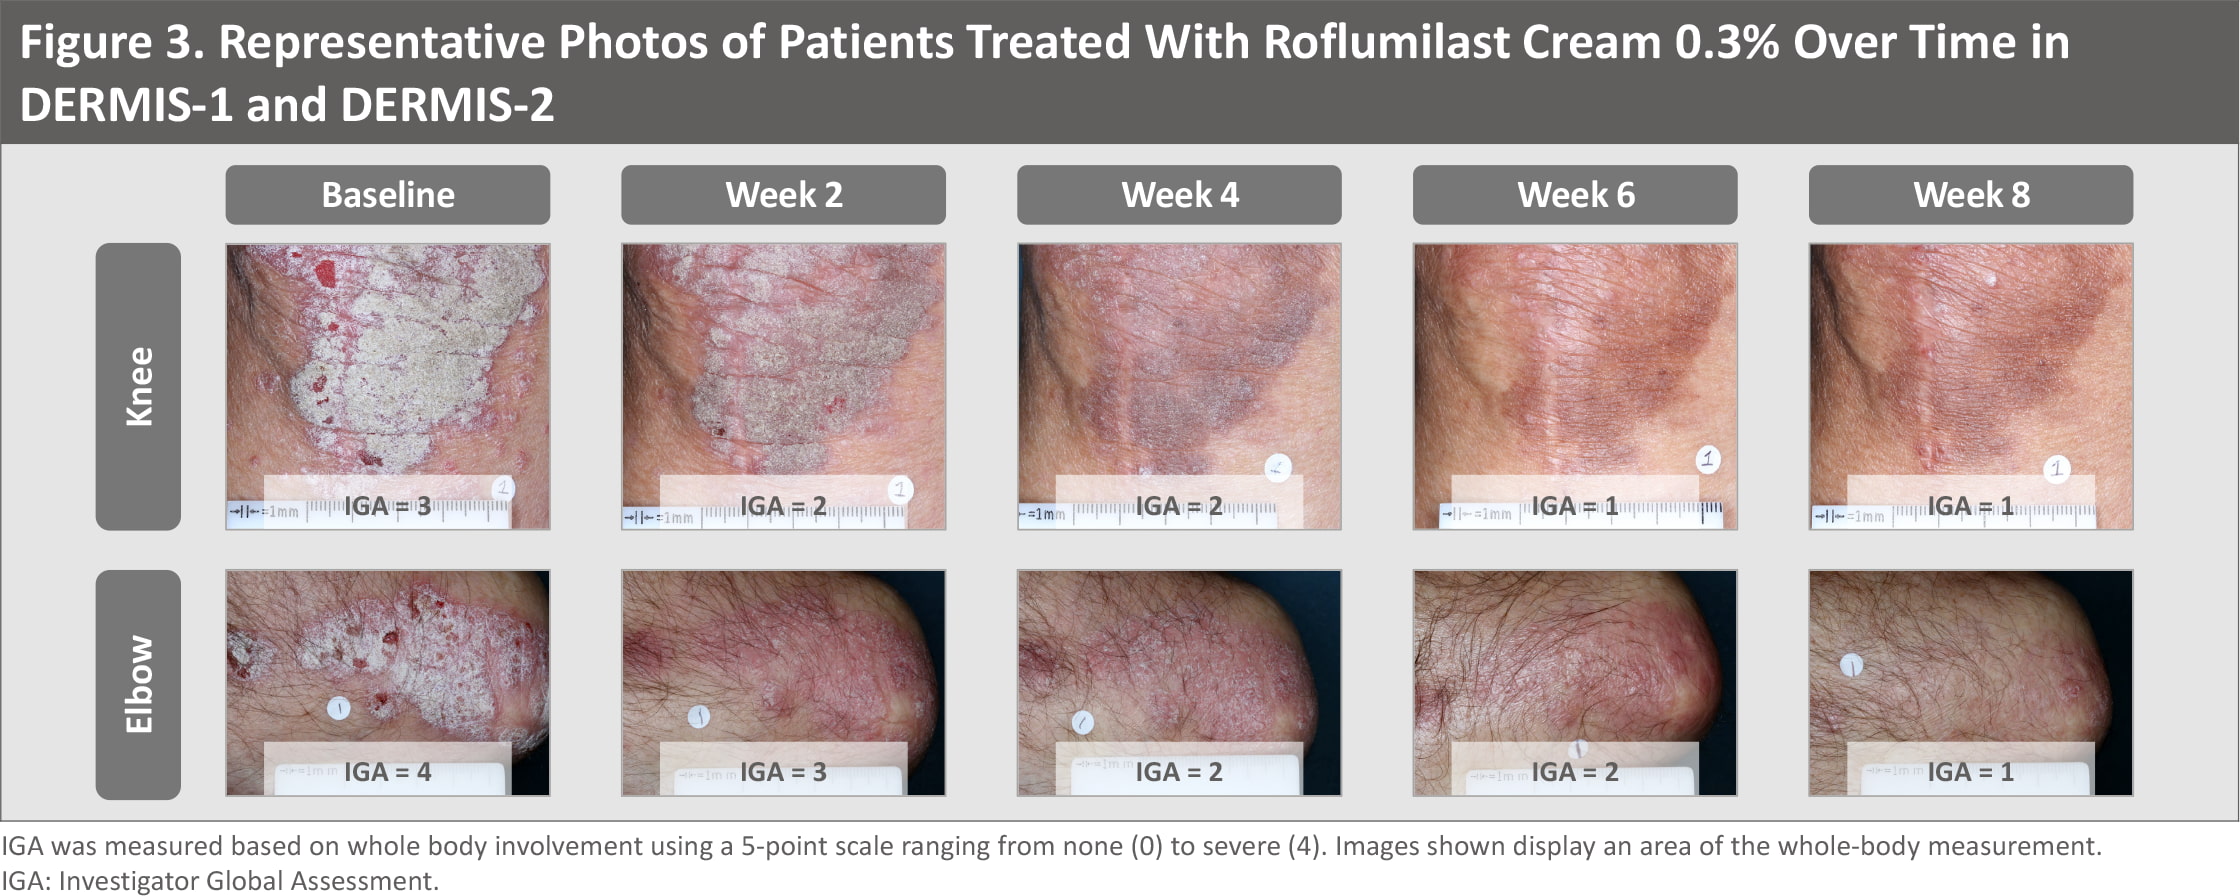 roflumilast psoriasis results 07 - Zoryve: New Effective Cream for Psoriasis